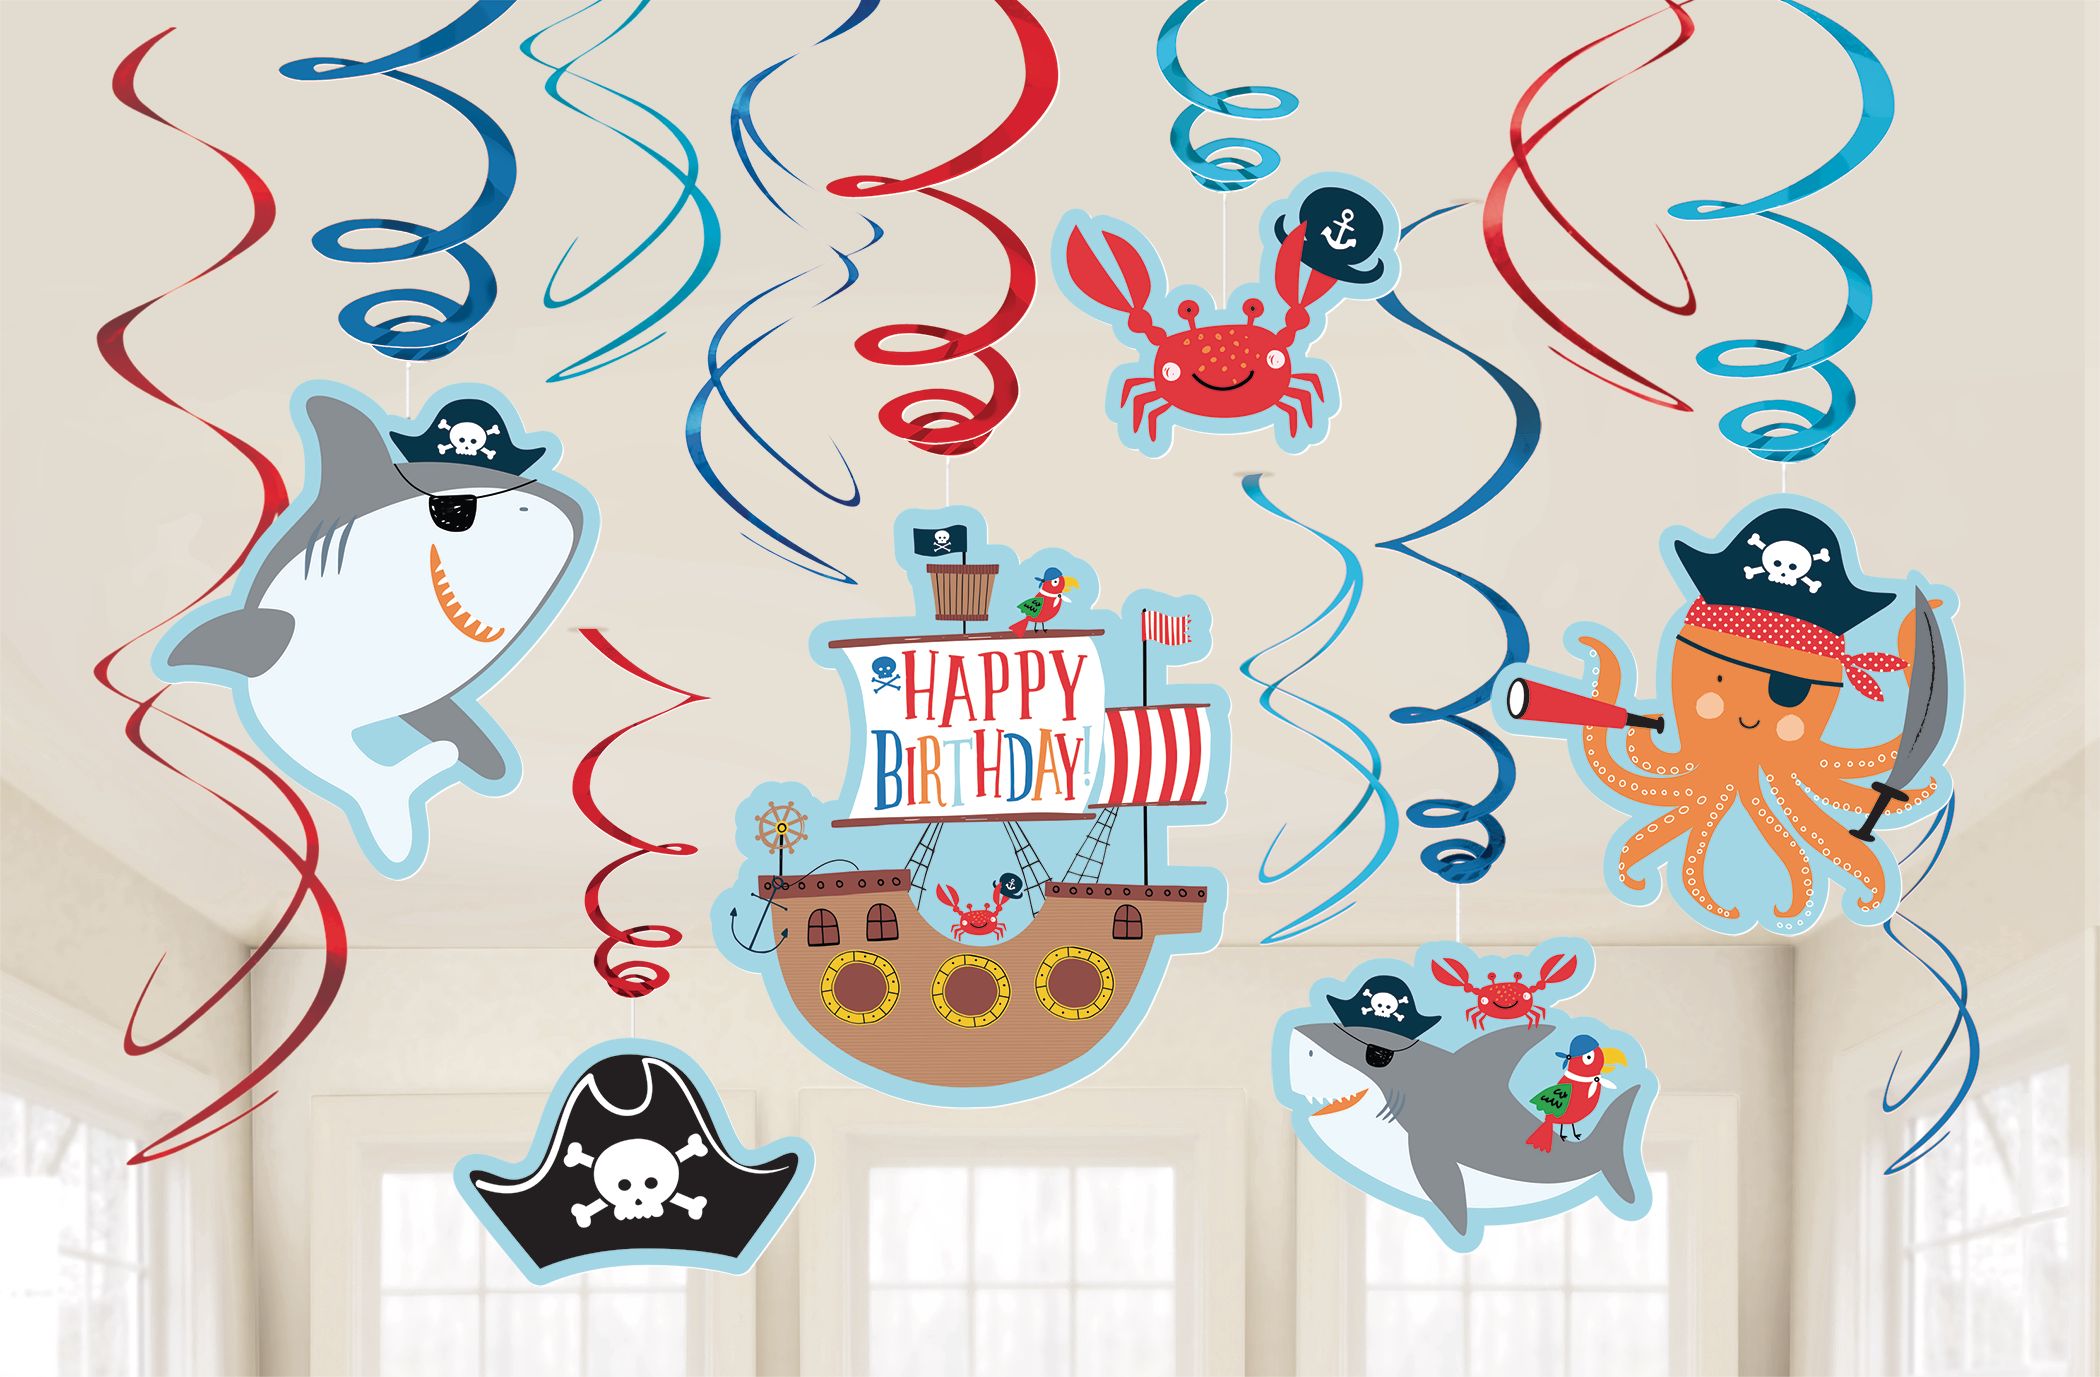 PIRATE THEMED HAPPY BIRTHDAY BANNER - Pirate party supplies - pirate  decorations - pirate birthday party supplies - pirate party - pirate pinata  - pirate party favors - pirate birthday party - pirate theme party supplies  - pirate decorations party - pirat